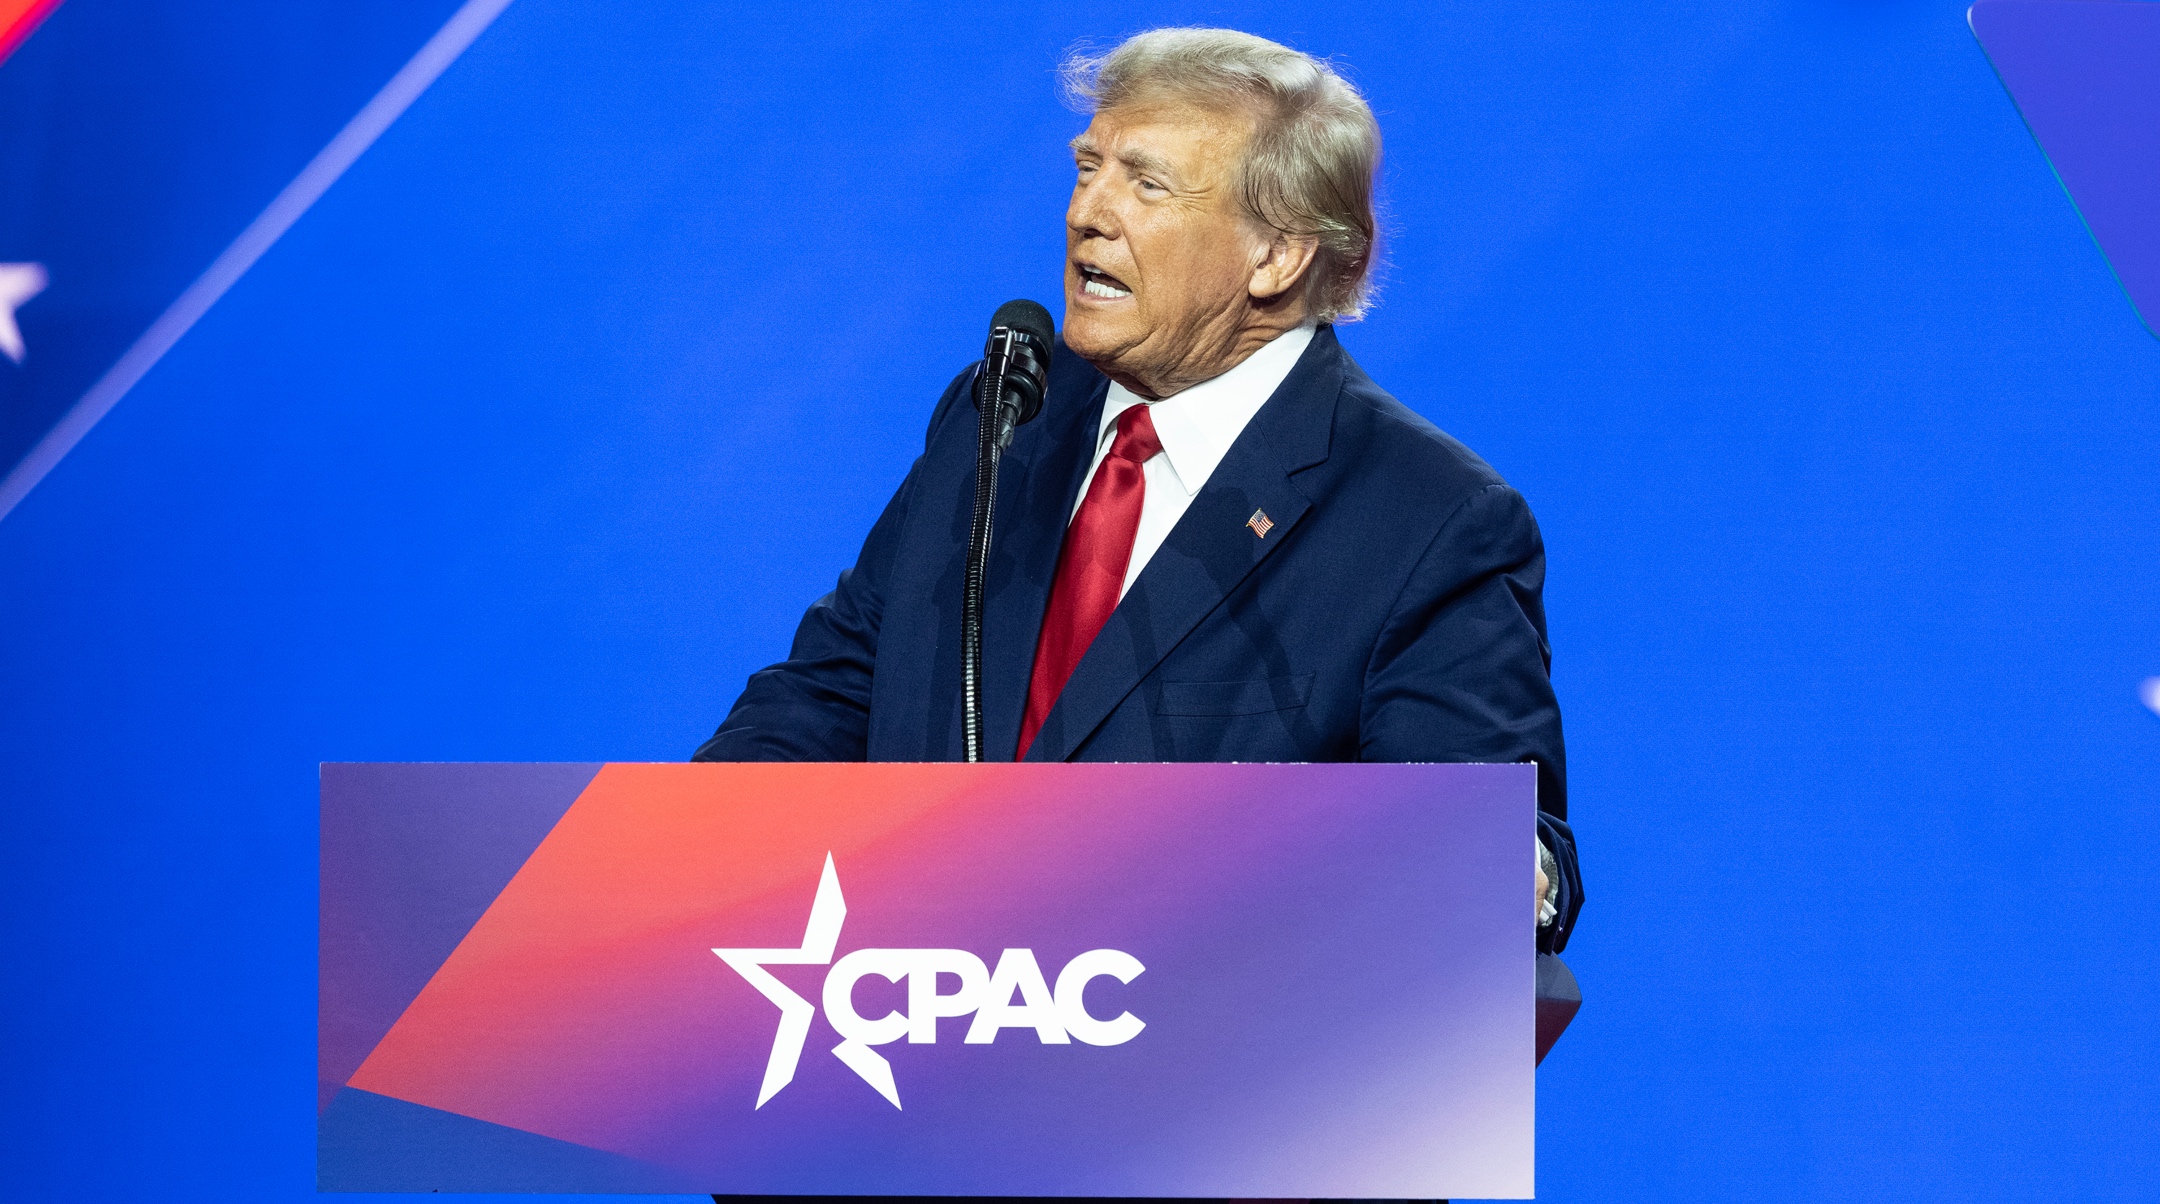 Donald J. Trump, 45th President of the United States speaks at the CPAC conference in Washington, D.C., on March 4.